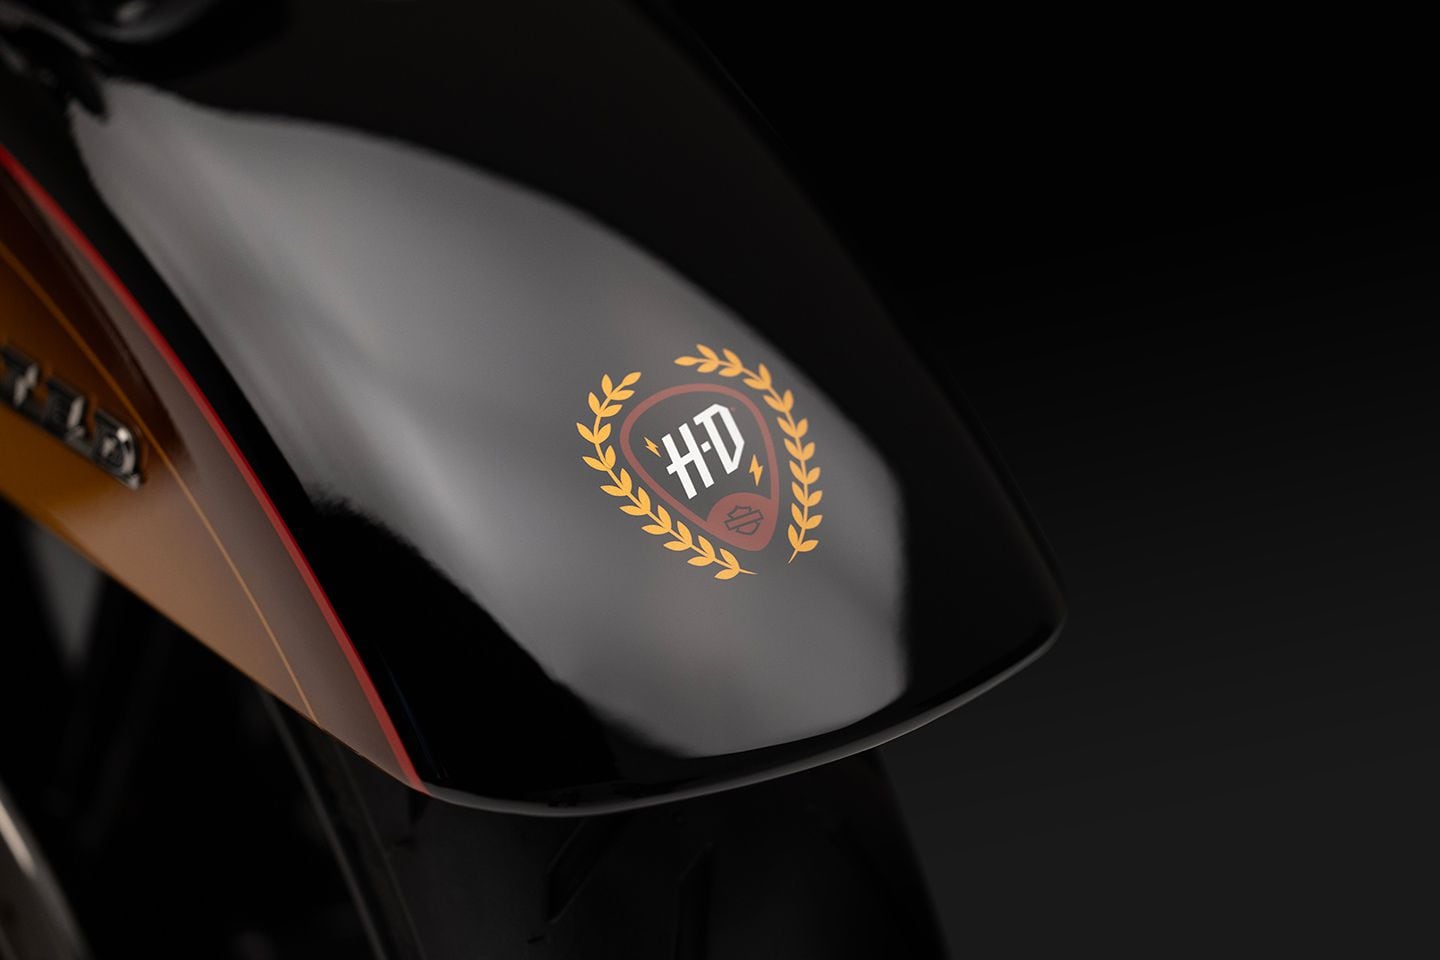 The logo on the front fenders resembles a guitar pick.